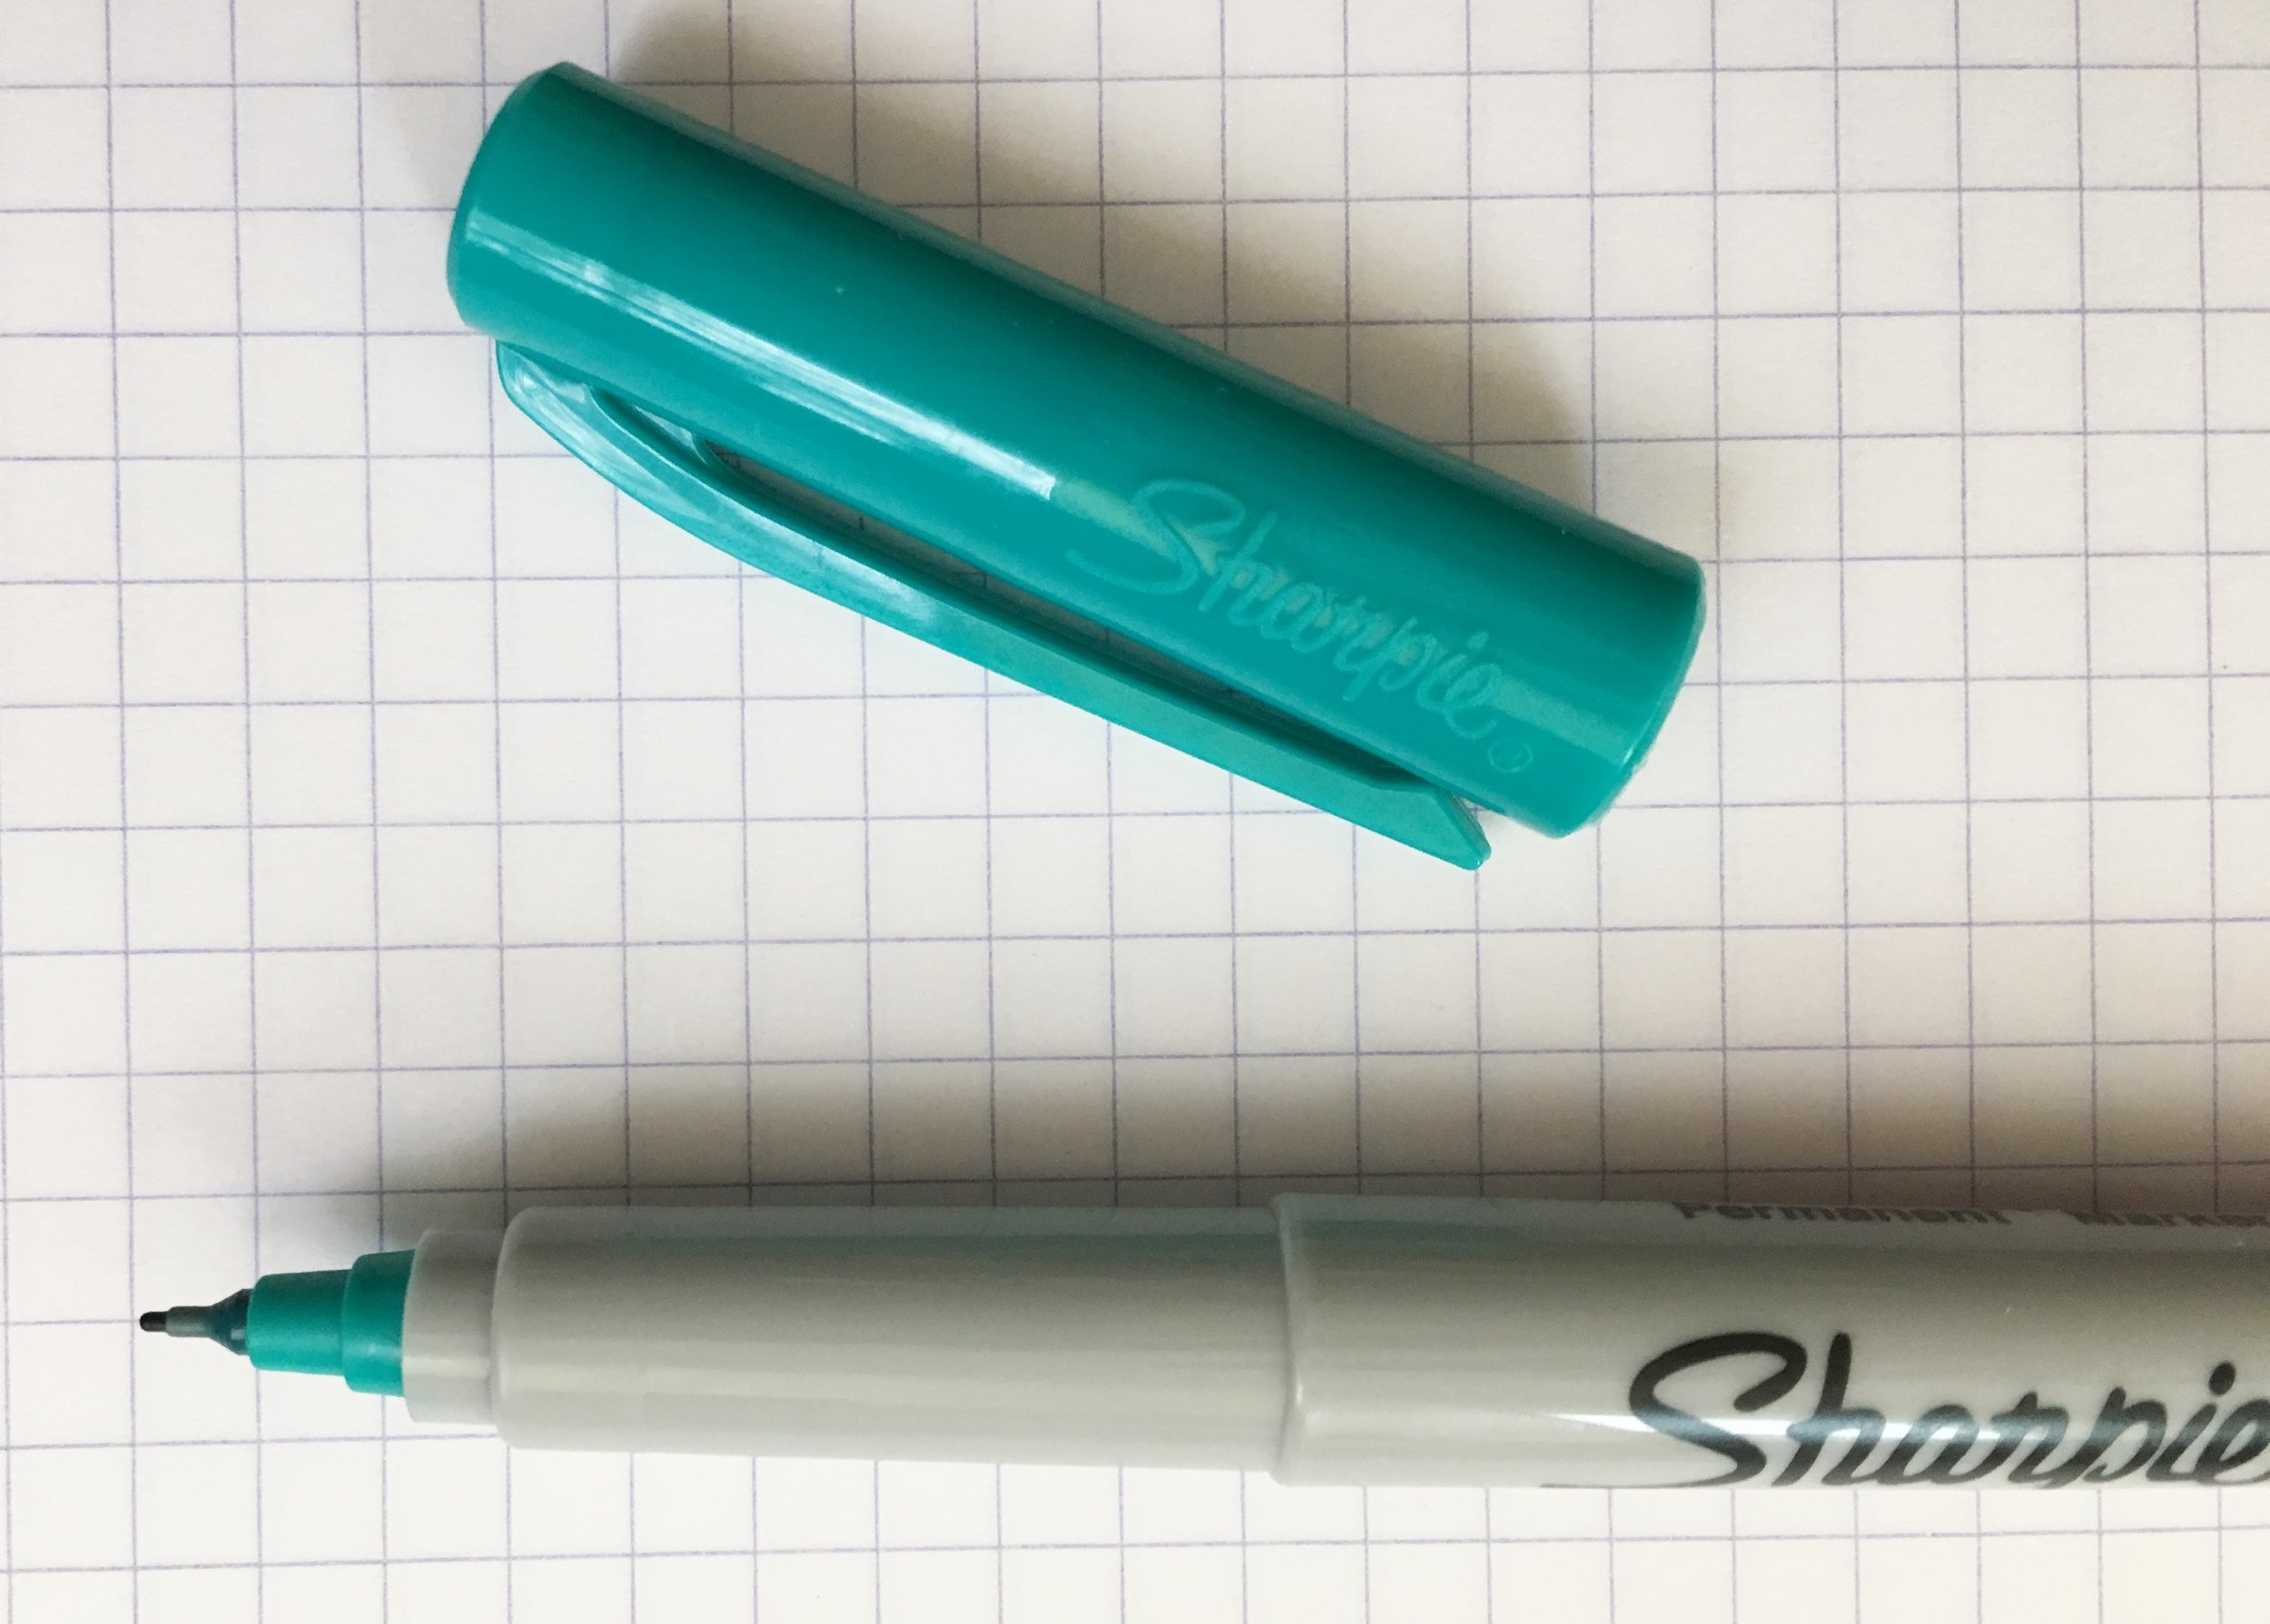 Review: Sharpie Pen Retractable - The Well-Appointed Desk